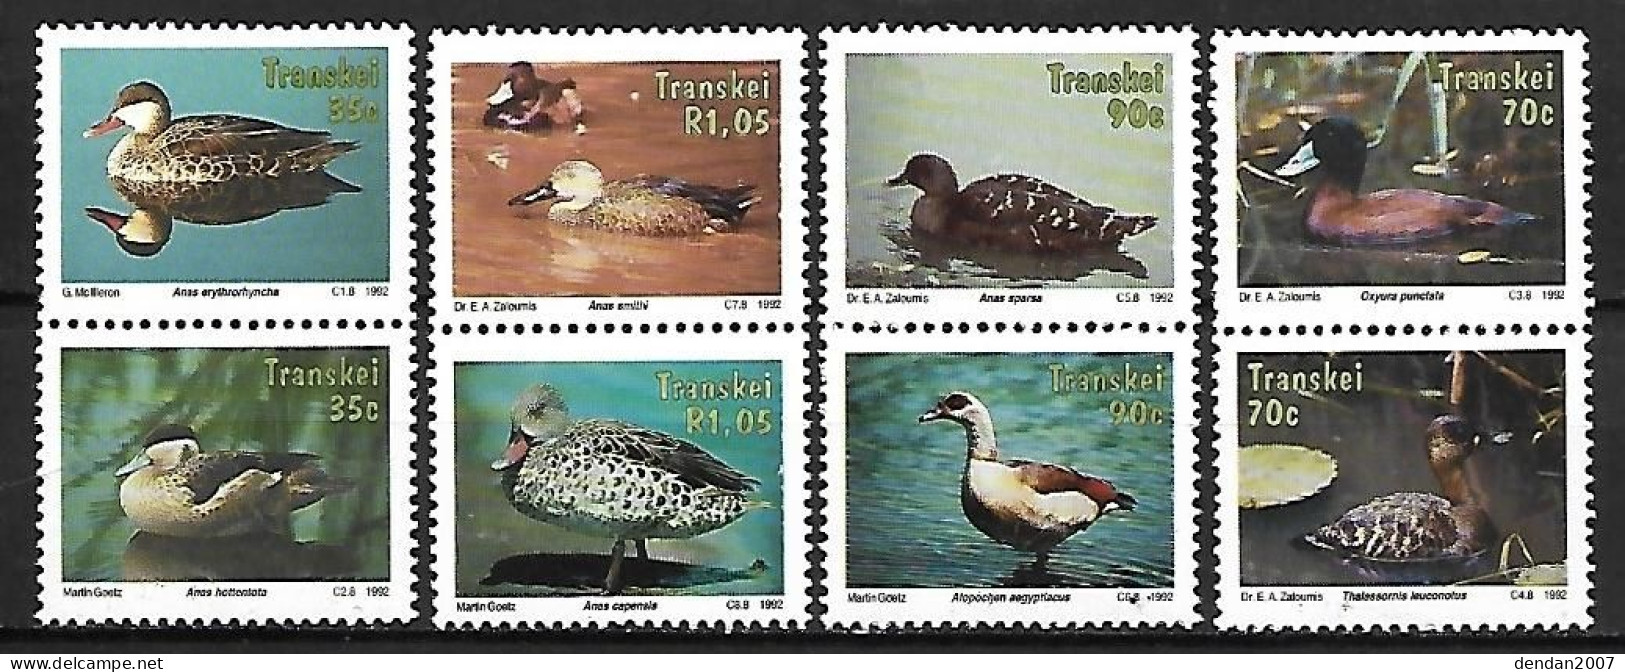 Transkei (South Africa) : MNH ** 1992 Complete Set 8/8 : 8 Different Ducks And Gooses - Eagles & Birds Of Prey